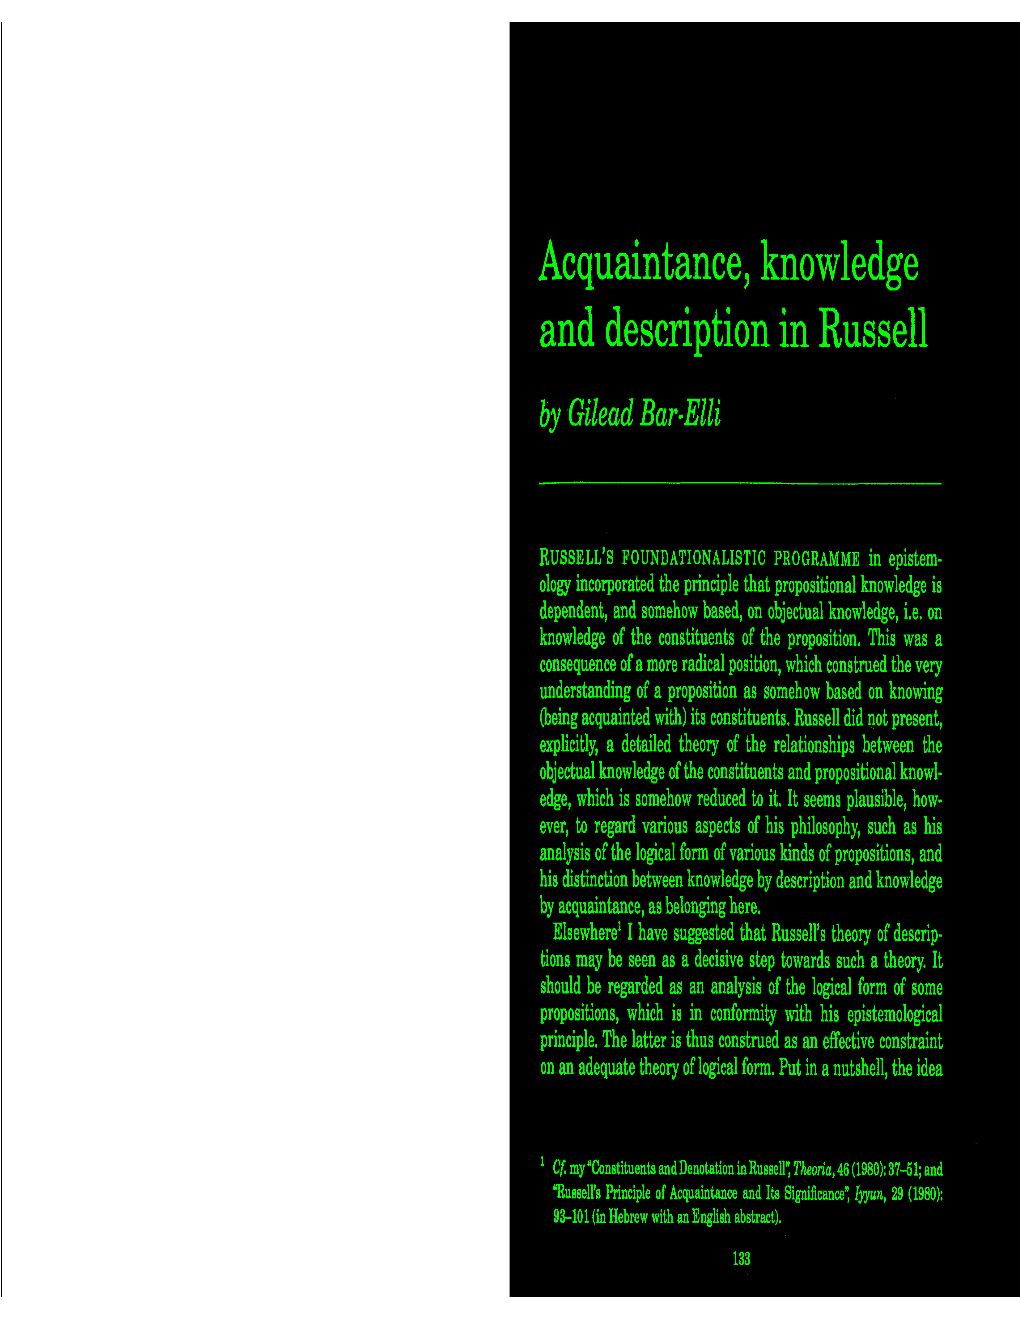 Acquaintance, Knowledge and Description in Russell by 'Gilead Bar-Elli